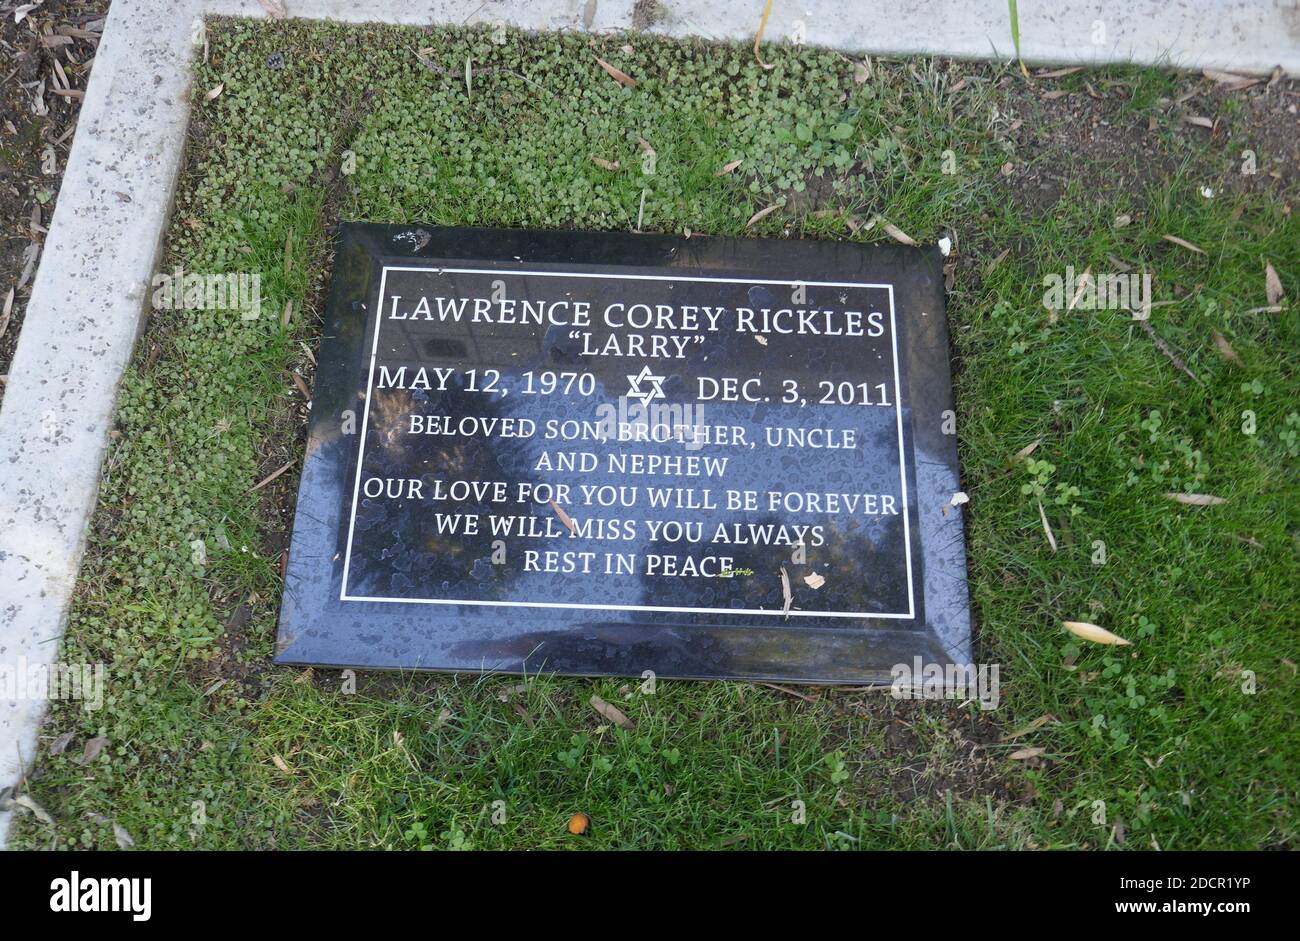 Los Angeles, California, USA 17th November 2020 A general view of atmosphere of screenwriter Larry Rickles Grave at Mount Sinai Cemetery Hollywood Hills on November 17, 2020 in Los Angeles, California, USA. Photo by Barry King/Alamy Stock Photo Stock Photo